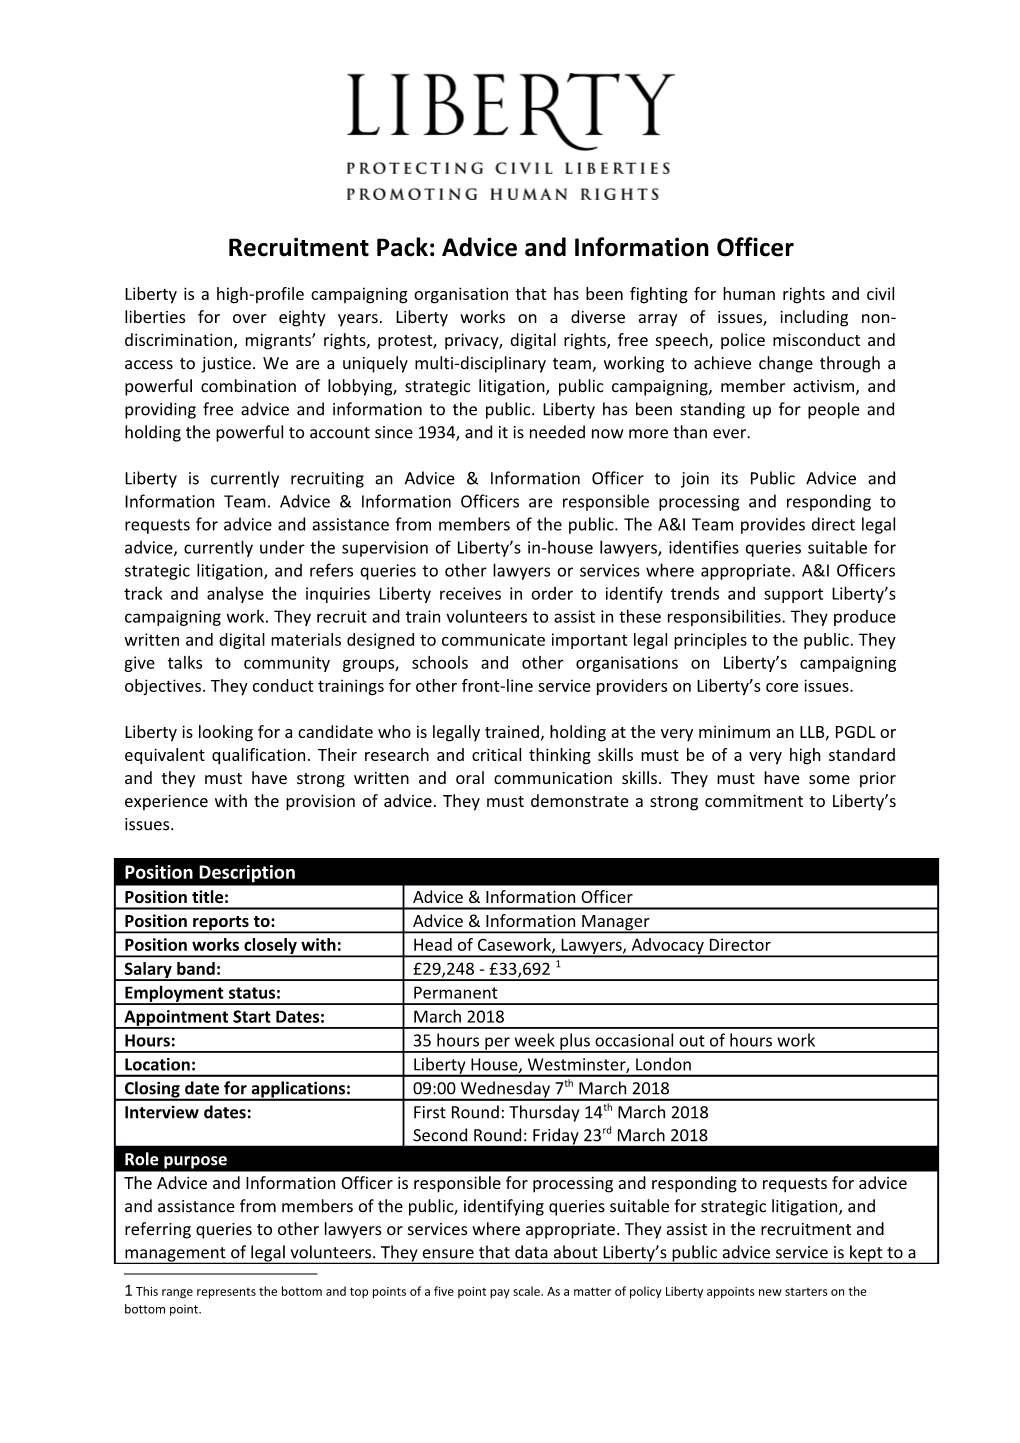 Recruitment Pack: Advice and Informationofficer